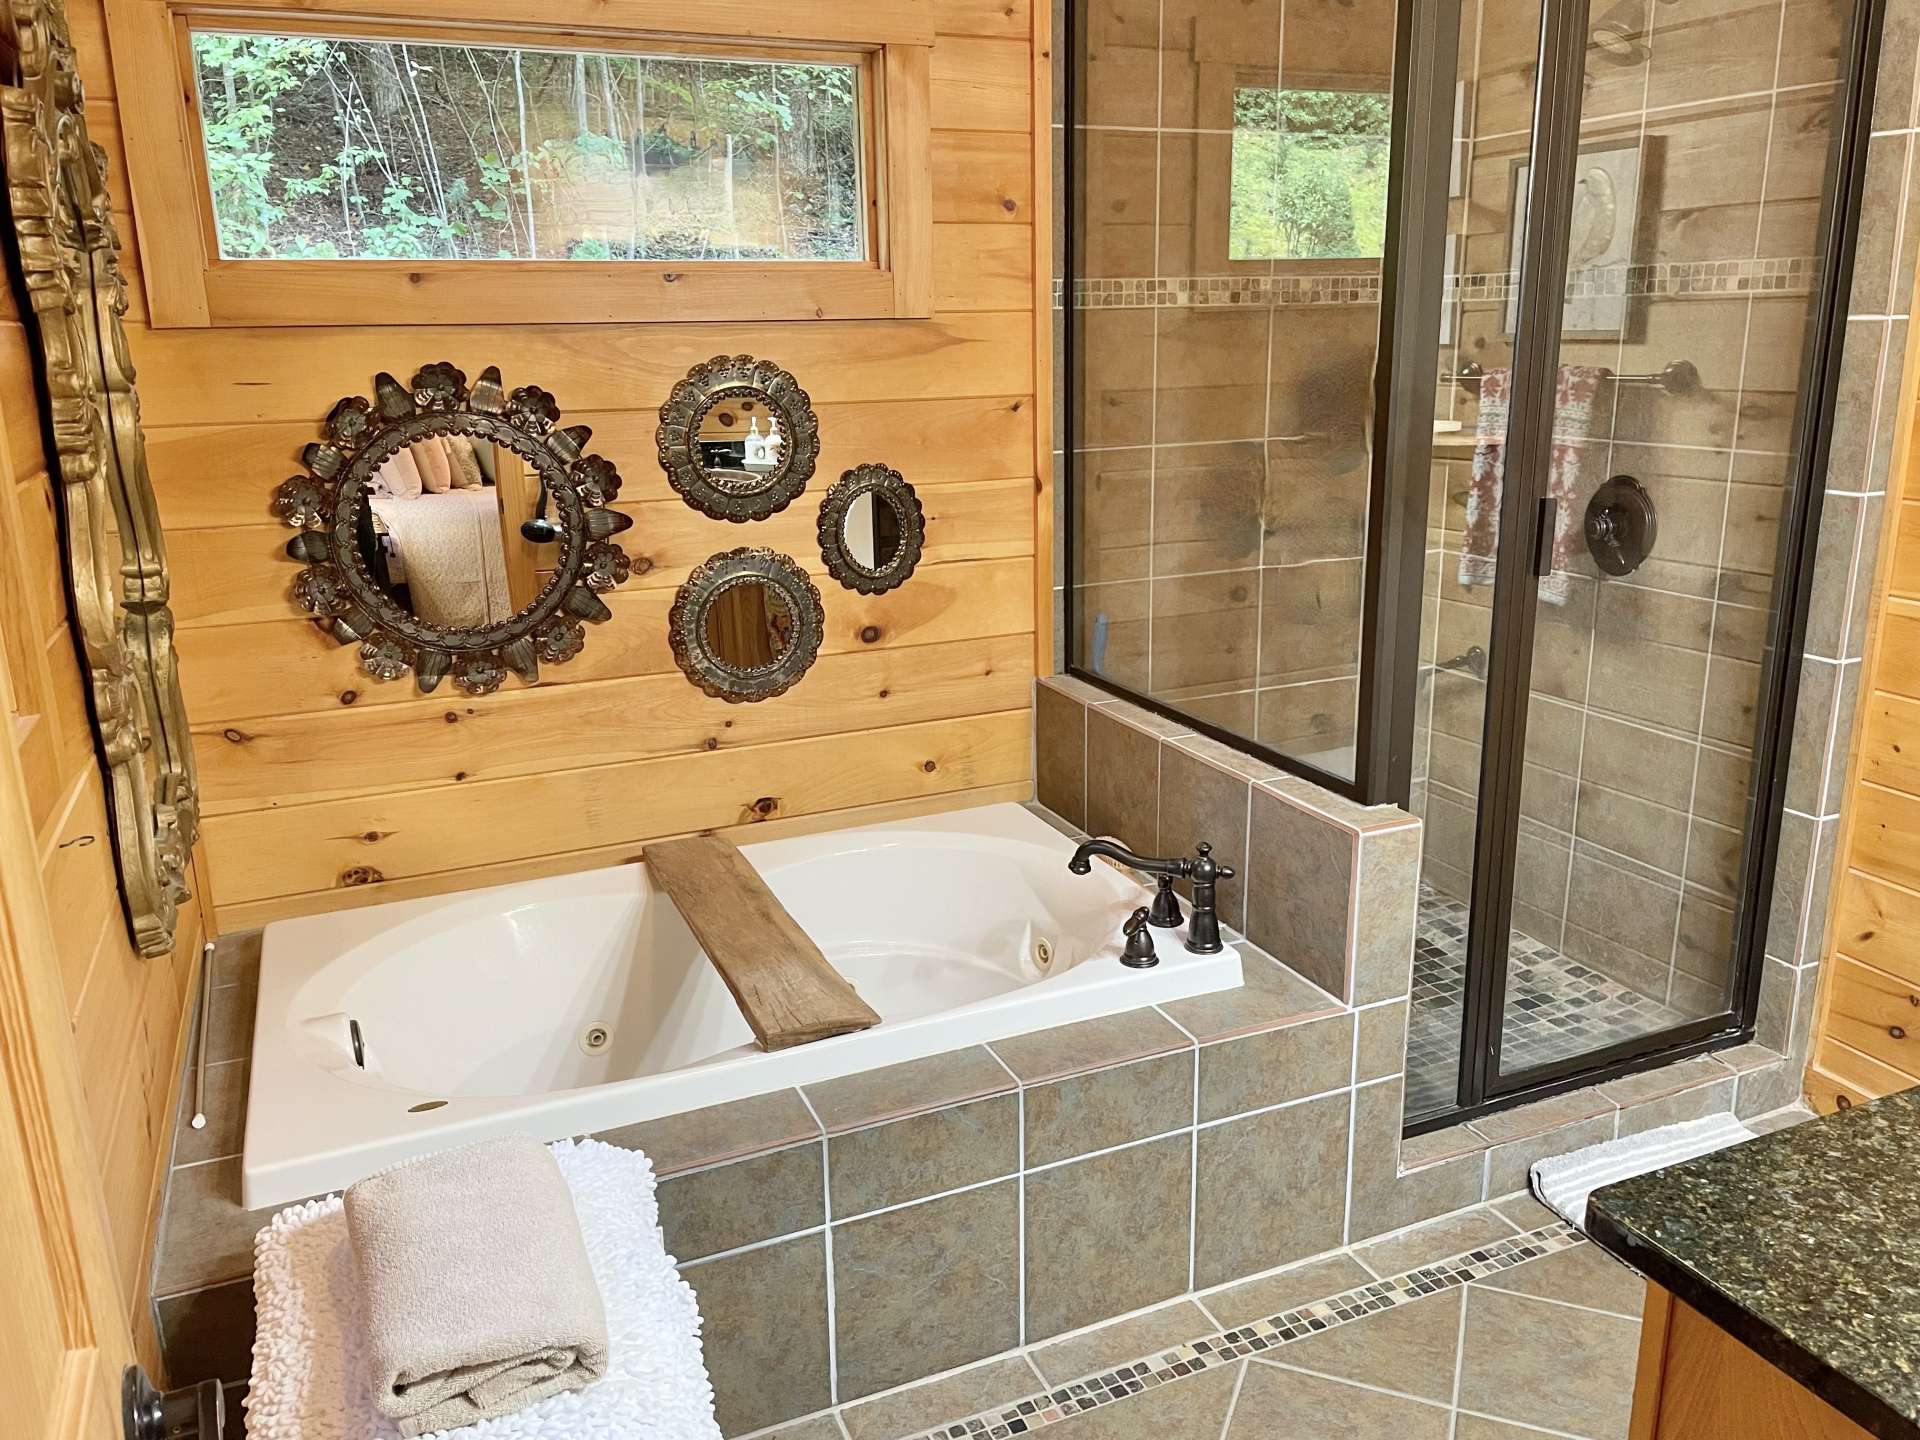 Primary bath with soaking tub and glass enclosed shower.